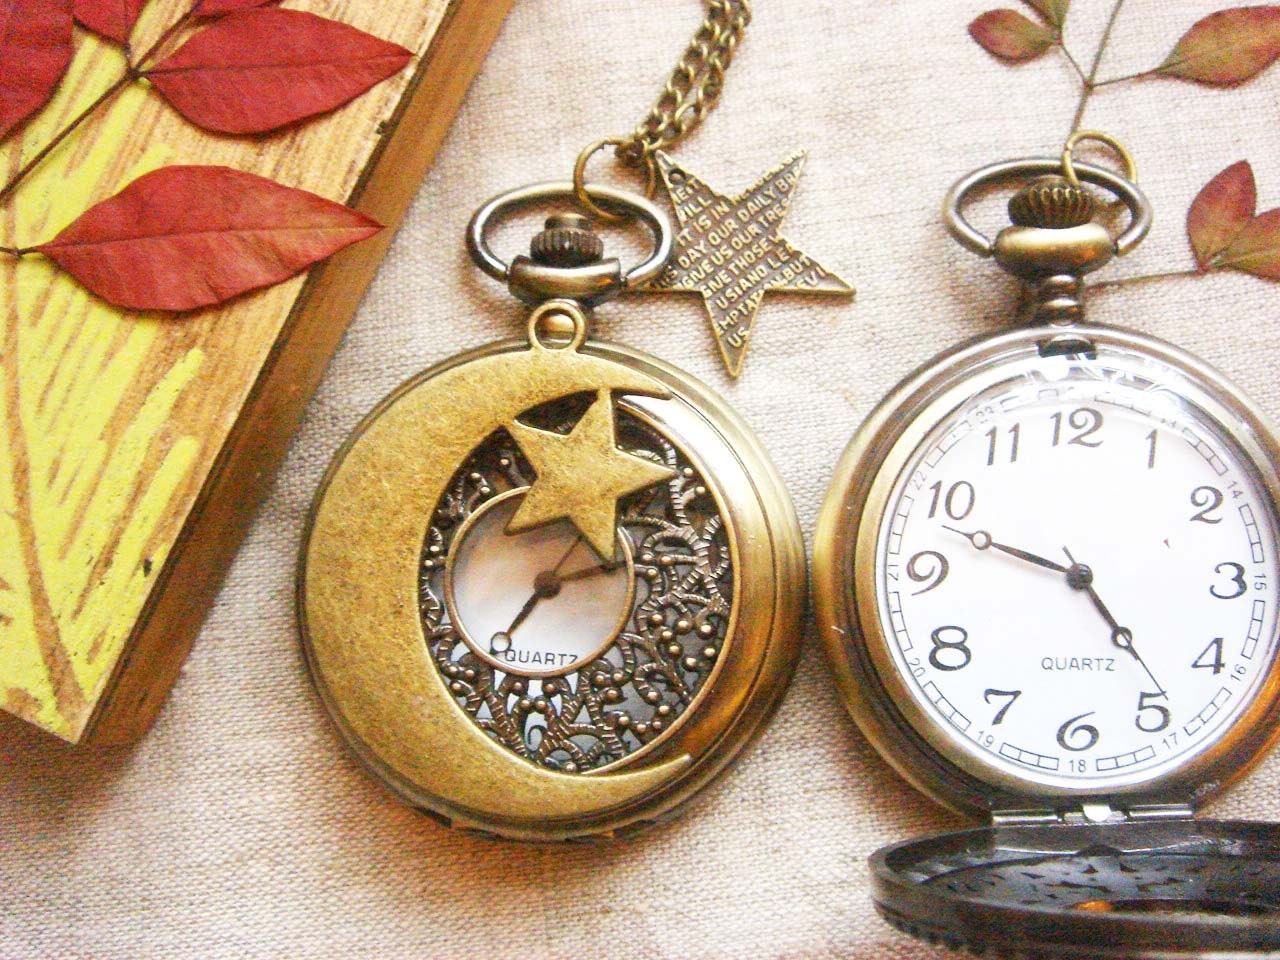 Antique Moon and Star charm Pocket Watch Necklace